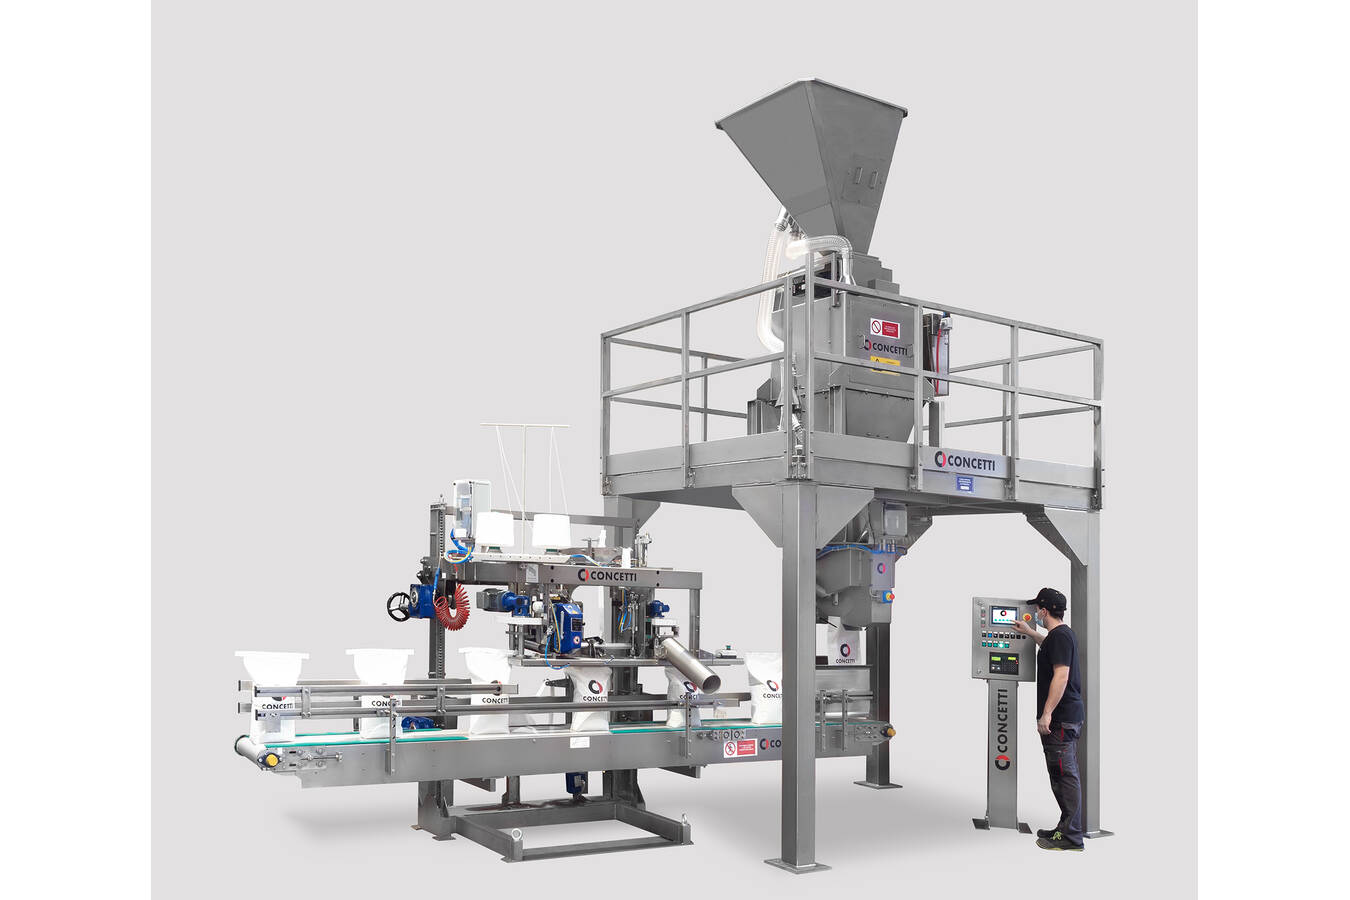 Concetti presents a new semi-automatic filling and closing line Speed and safety for the operator of this semi-automatic packaging plant with a production capacity of up to 1200 bags per hour